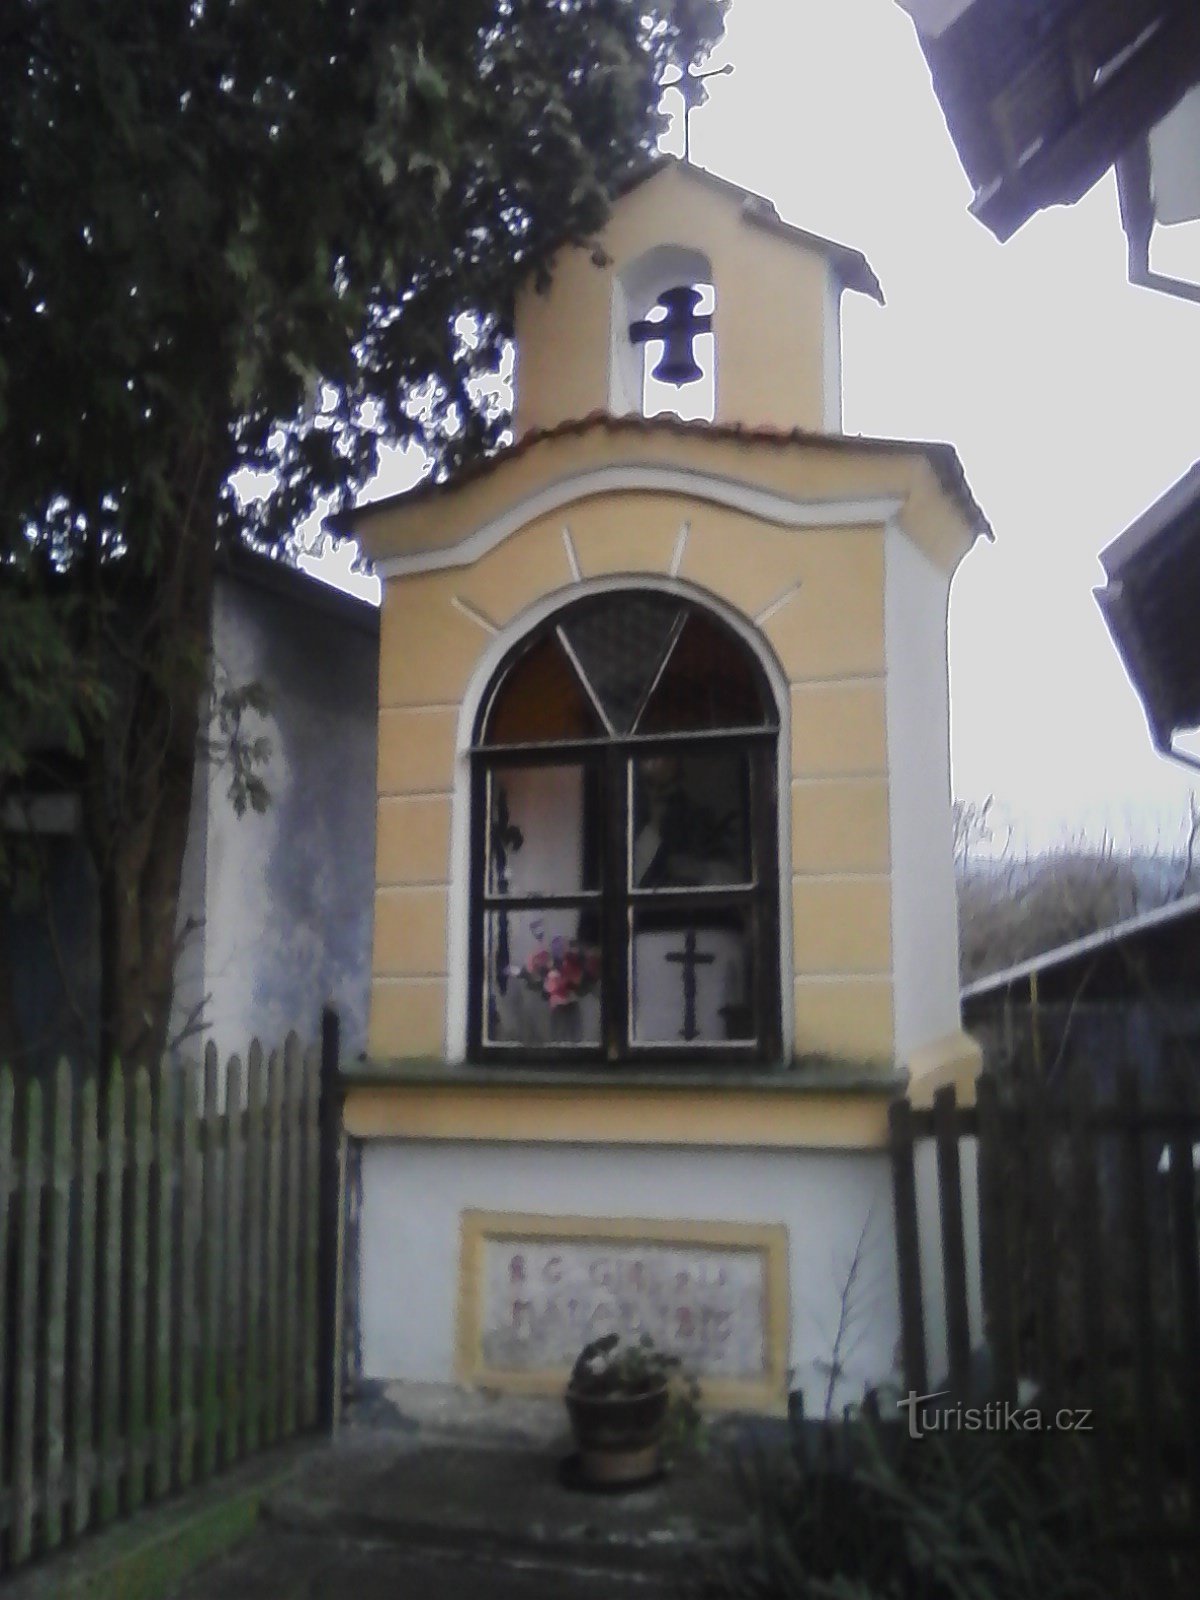 2. A small niche chapel in Lidkovice with a belfry and a two-armed cross in v